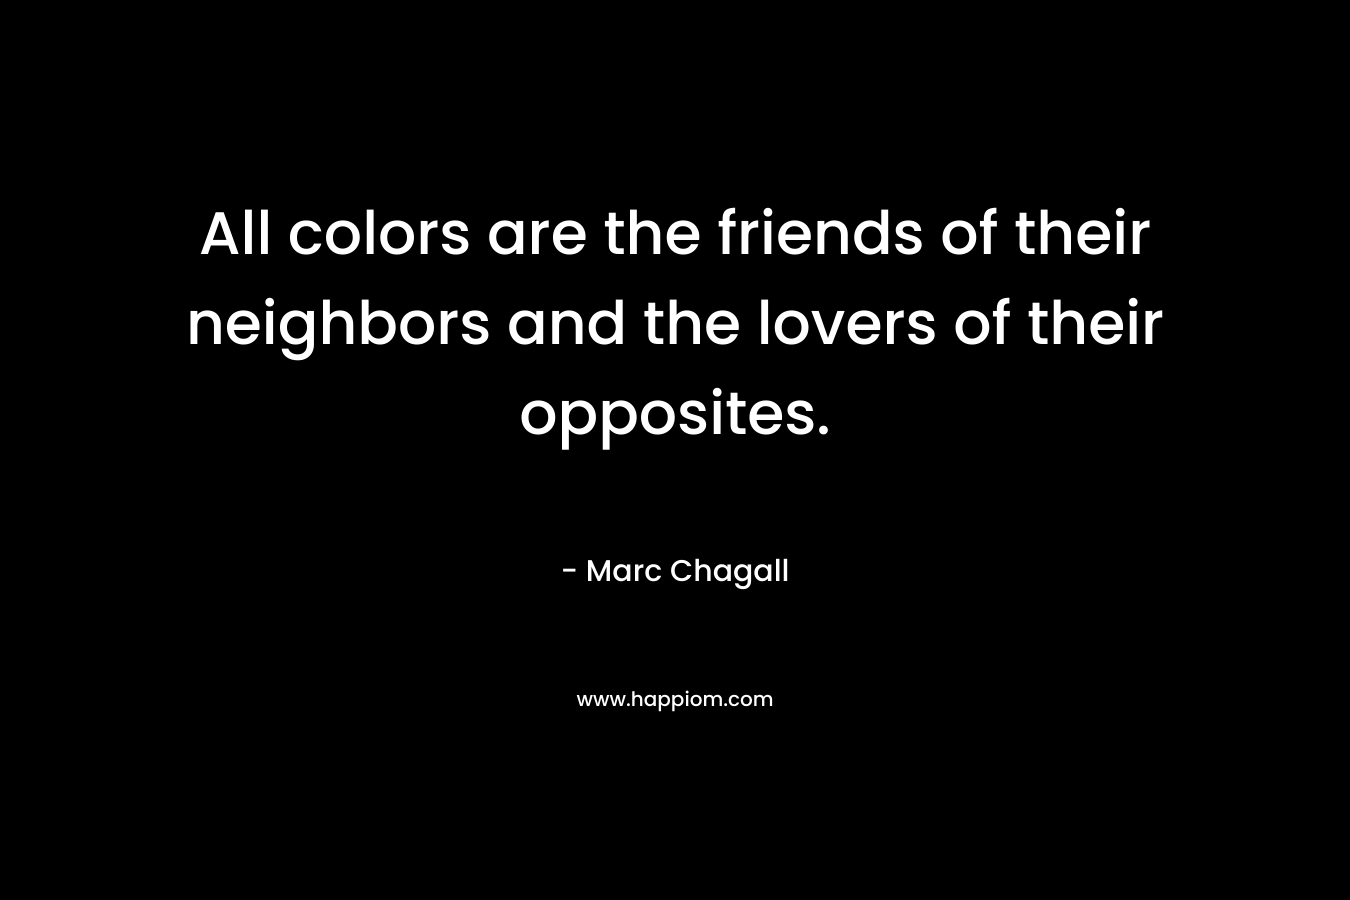 All colors are the friends of their neighbors and the lovers of their opposites.